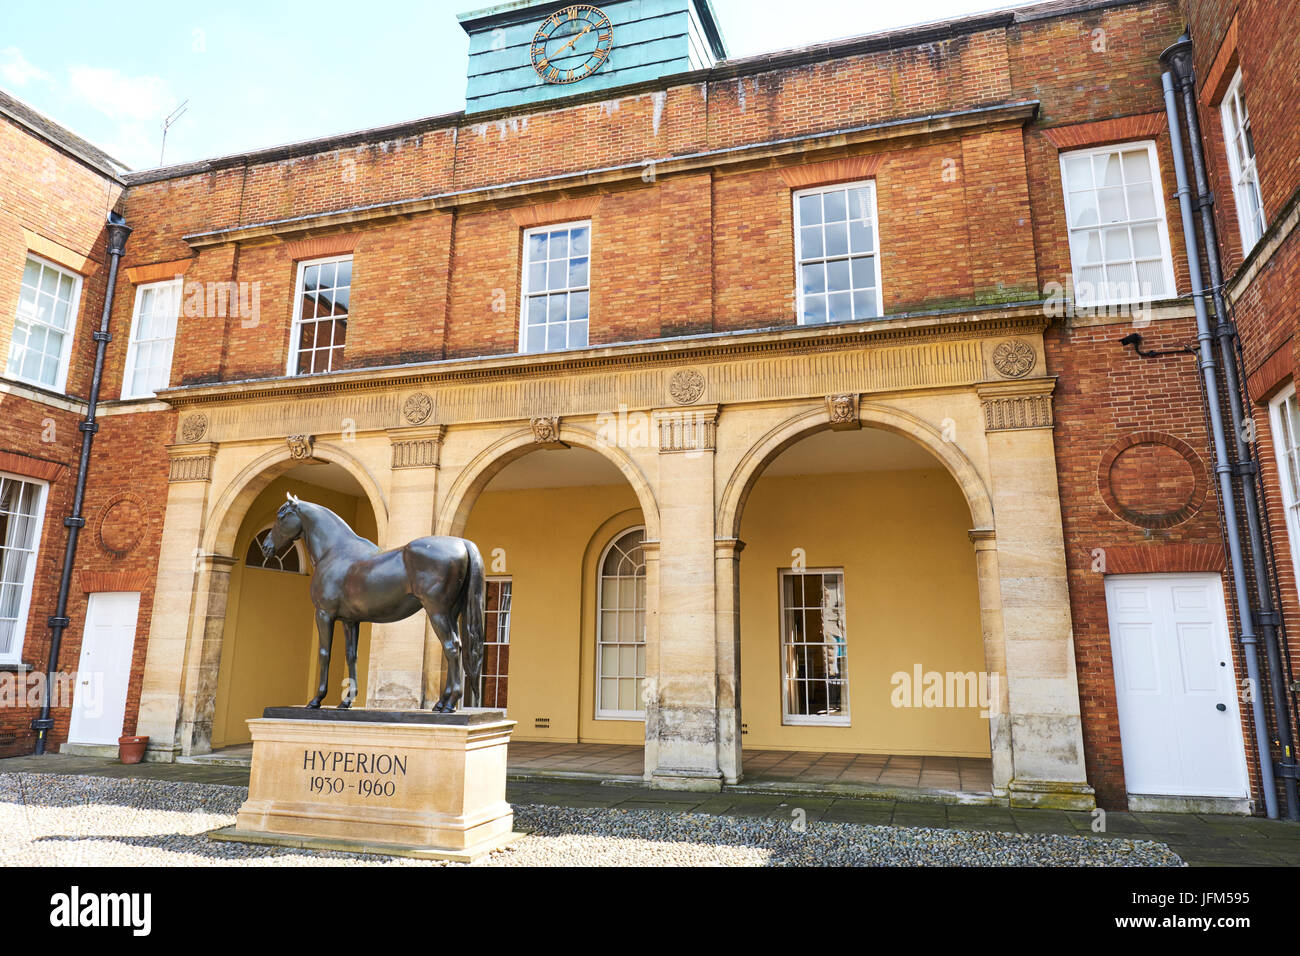 Statue Of Hyperion Outside The Jockey Club Rooms, High Street, Newmarket, Suffolk, UK Stock Photo